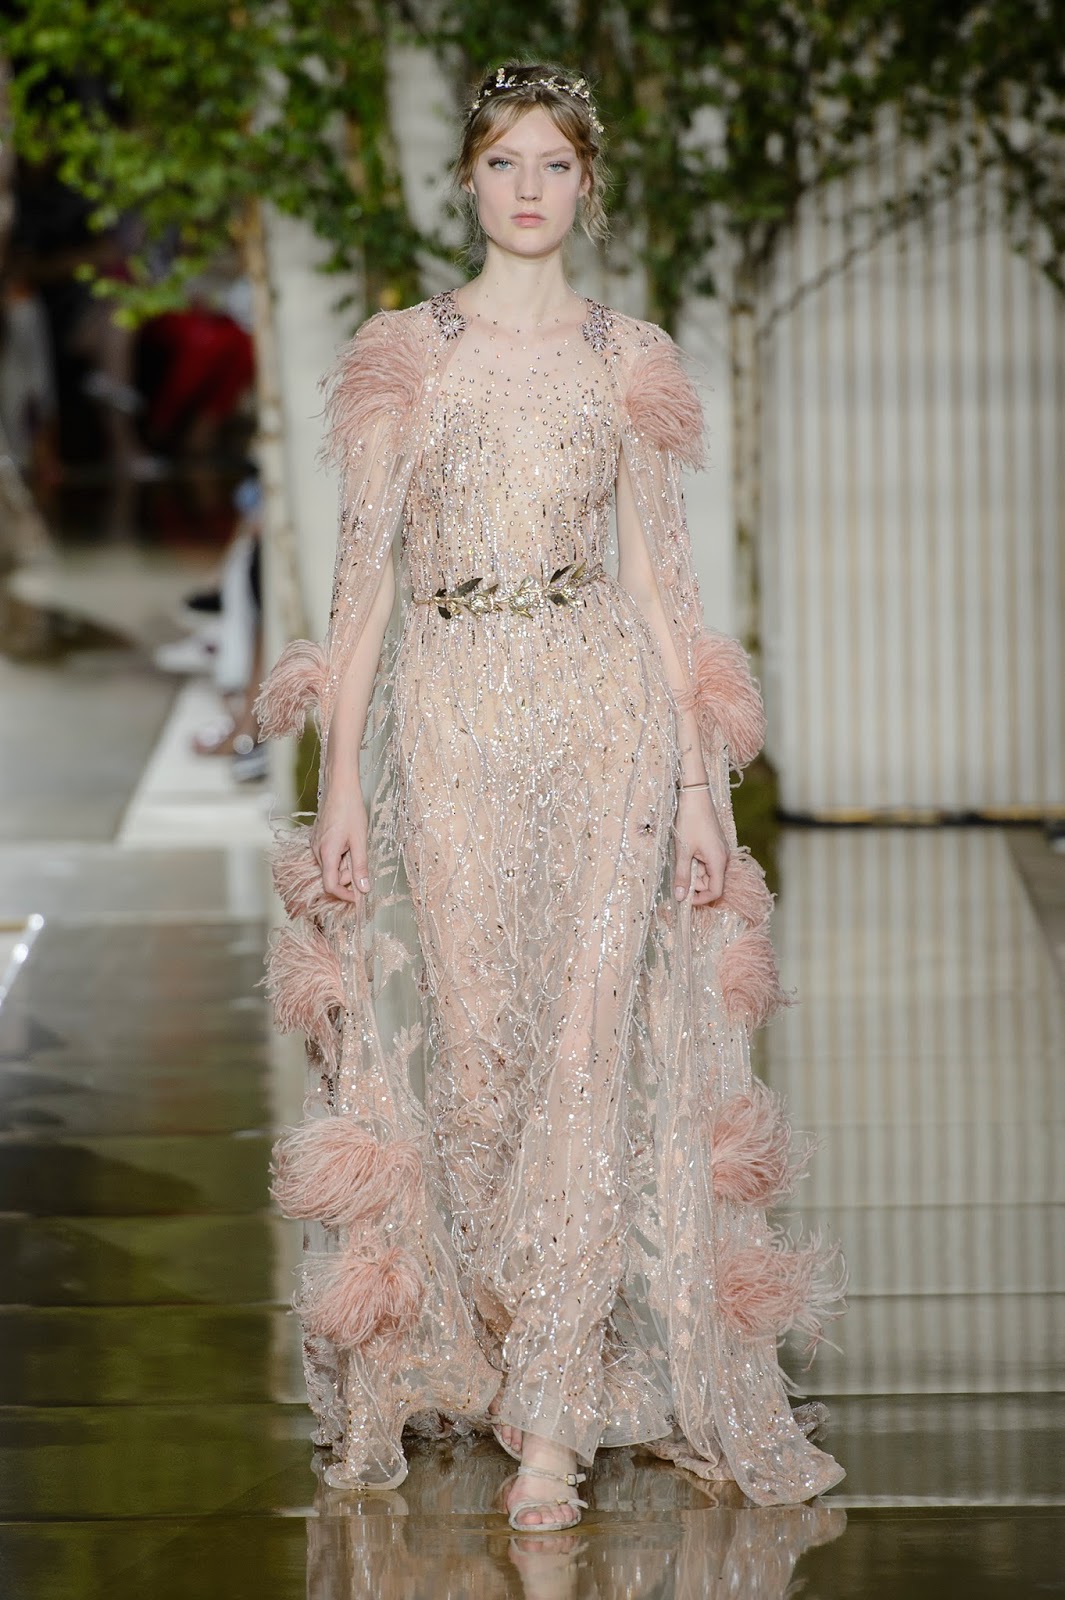 ZUHAIR MURAD HAUTE COUTURE July 12, 2017 | ZsaZsa Bellagio - Like No Other